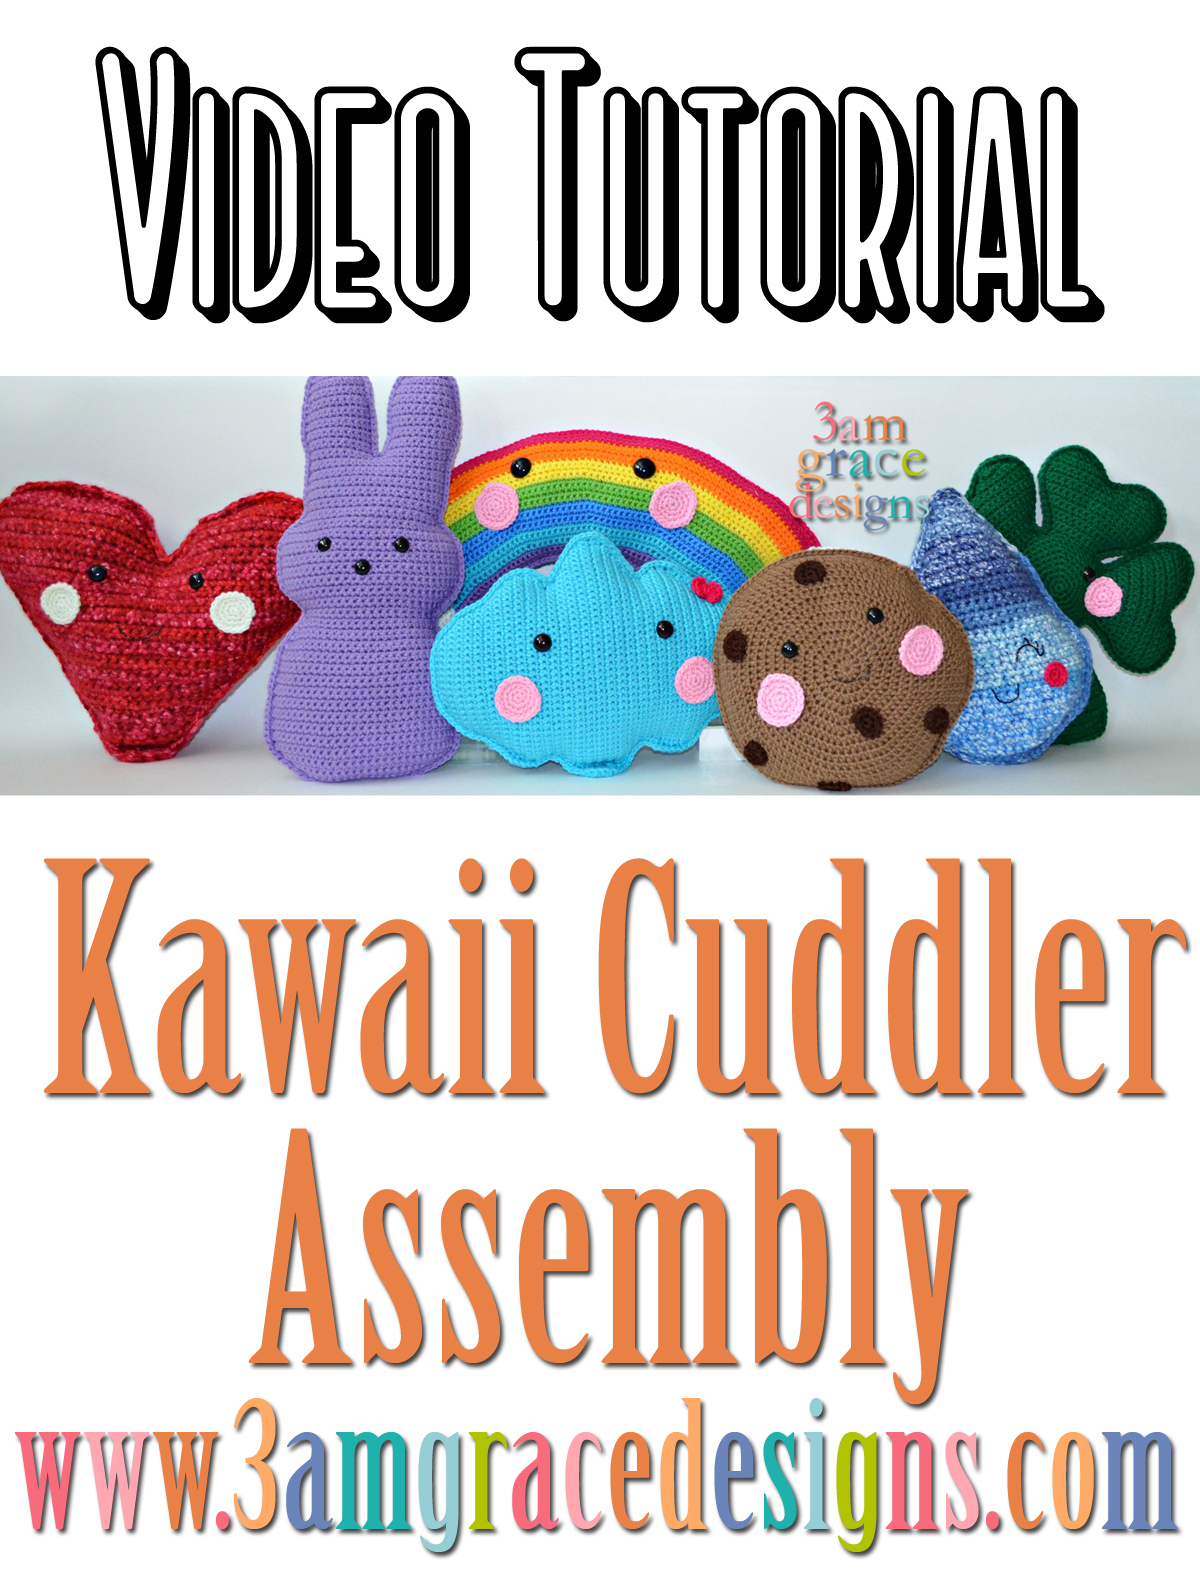 How To: Kawaii Cuddler Assembly